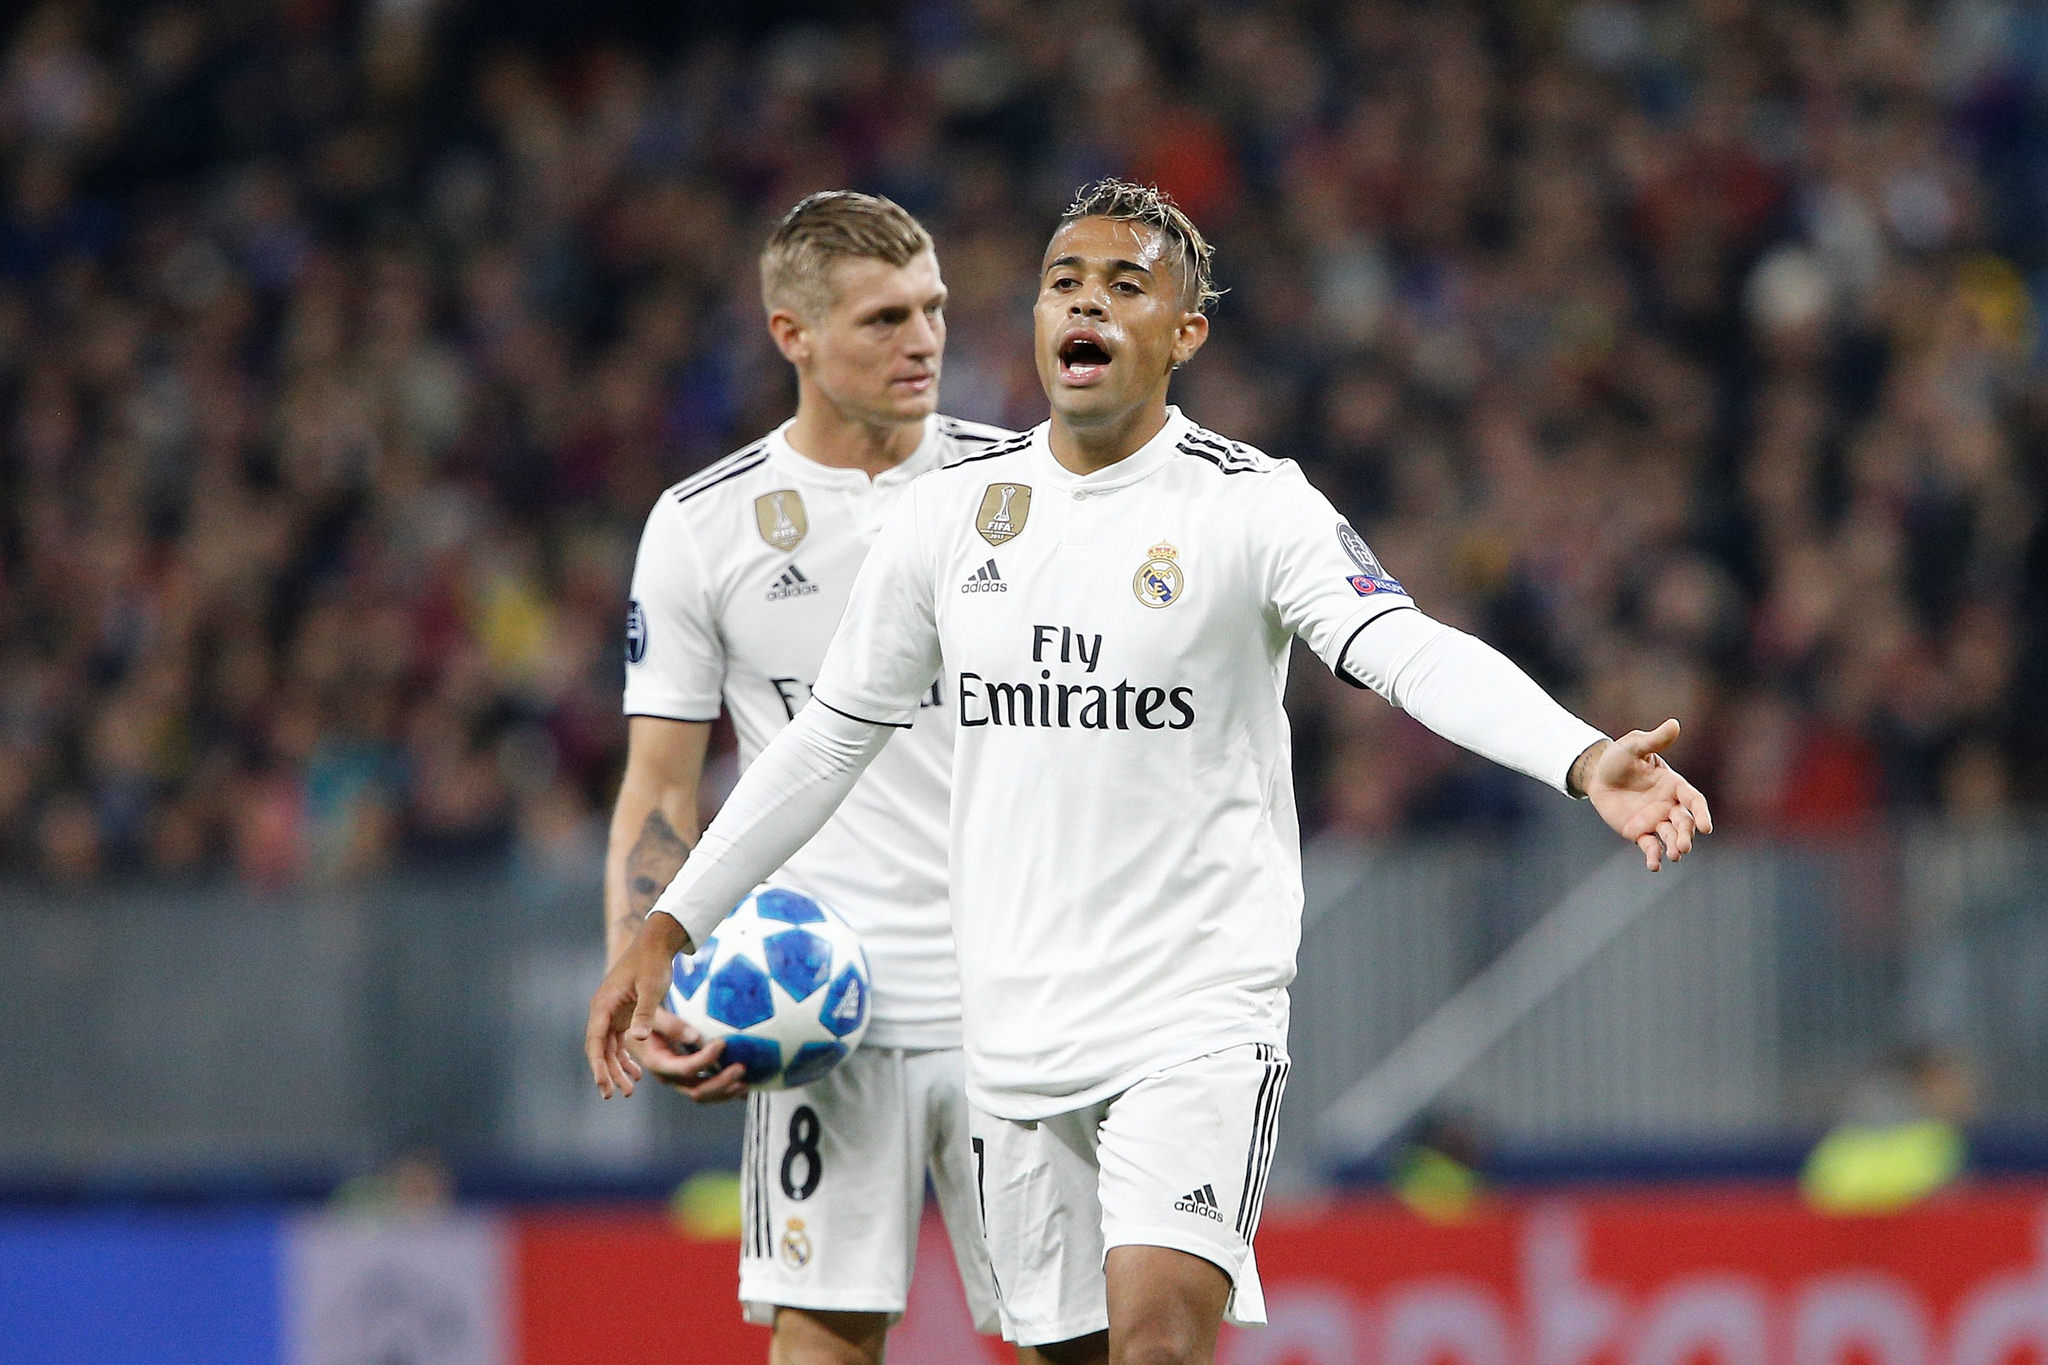 UCL: Real Madrid vs CSKA Moscow Preview